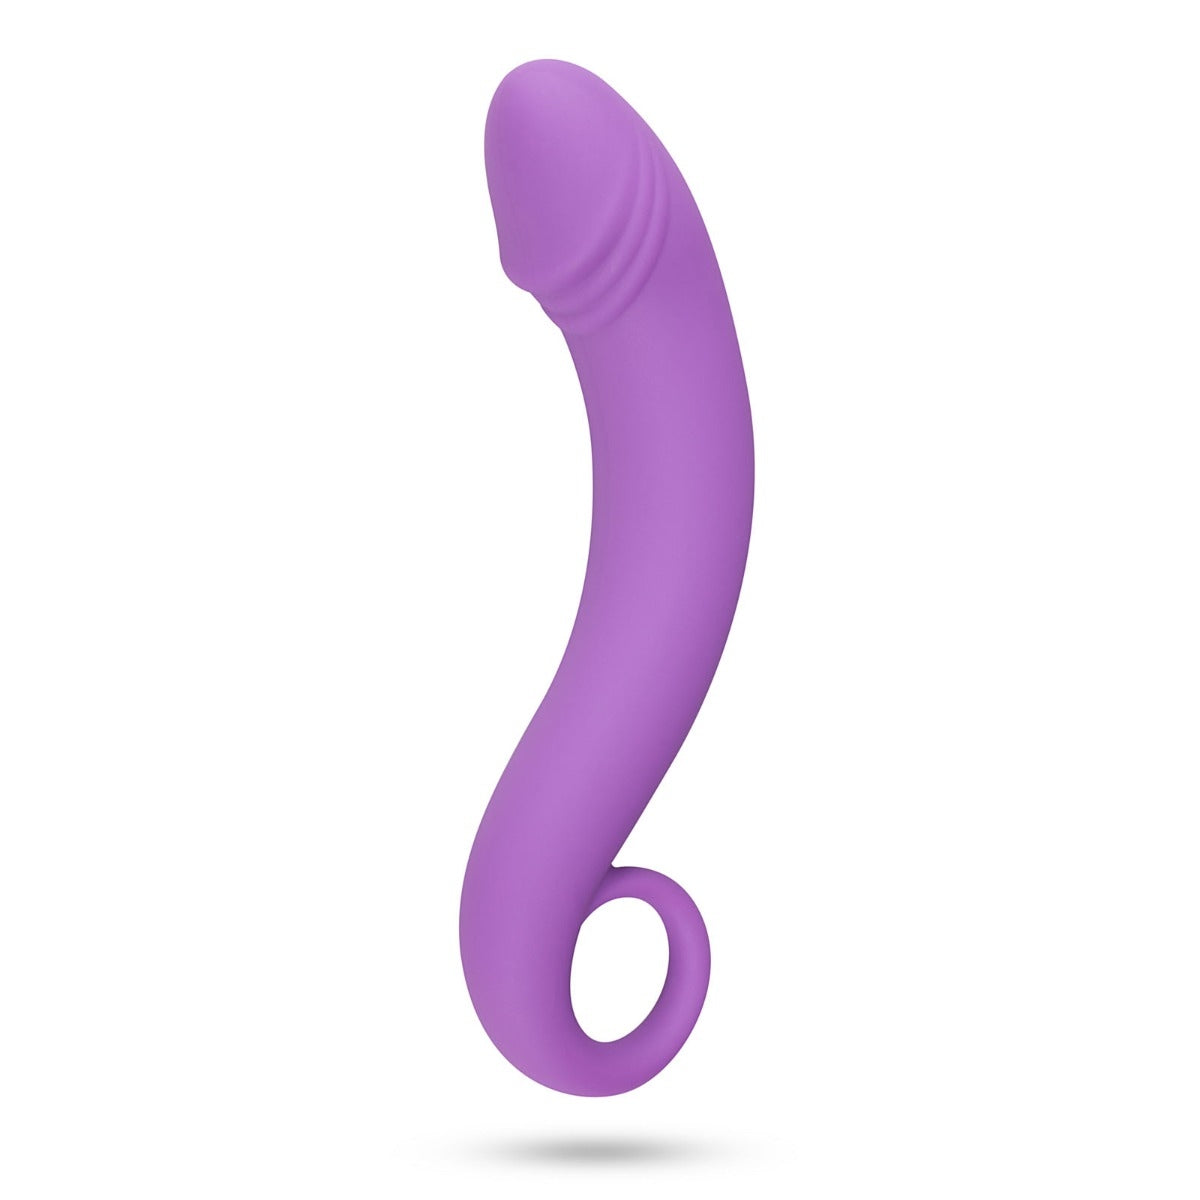 Loveboxxx Enjoy Yourself Deluxe Sex Toy Set For Her